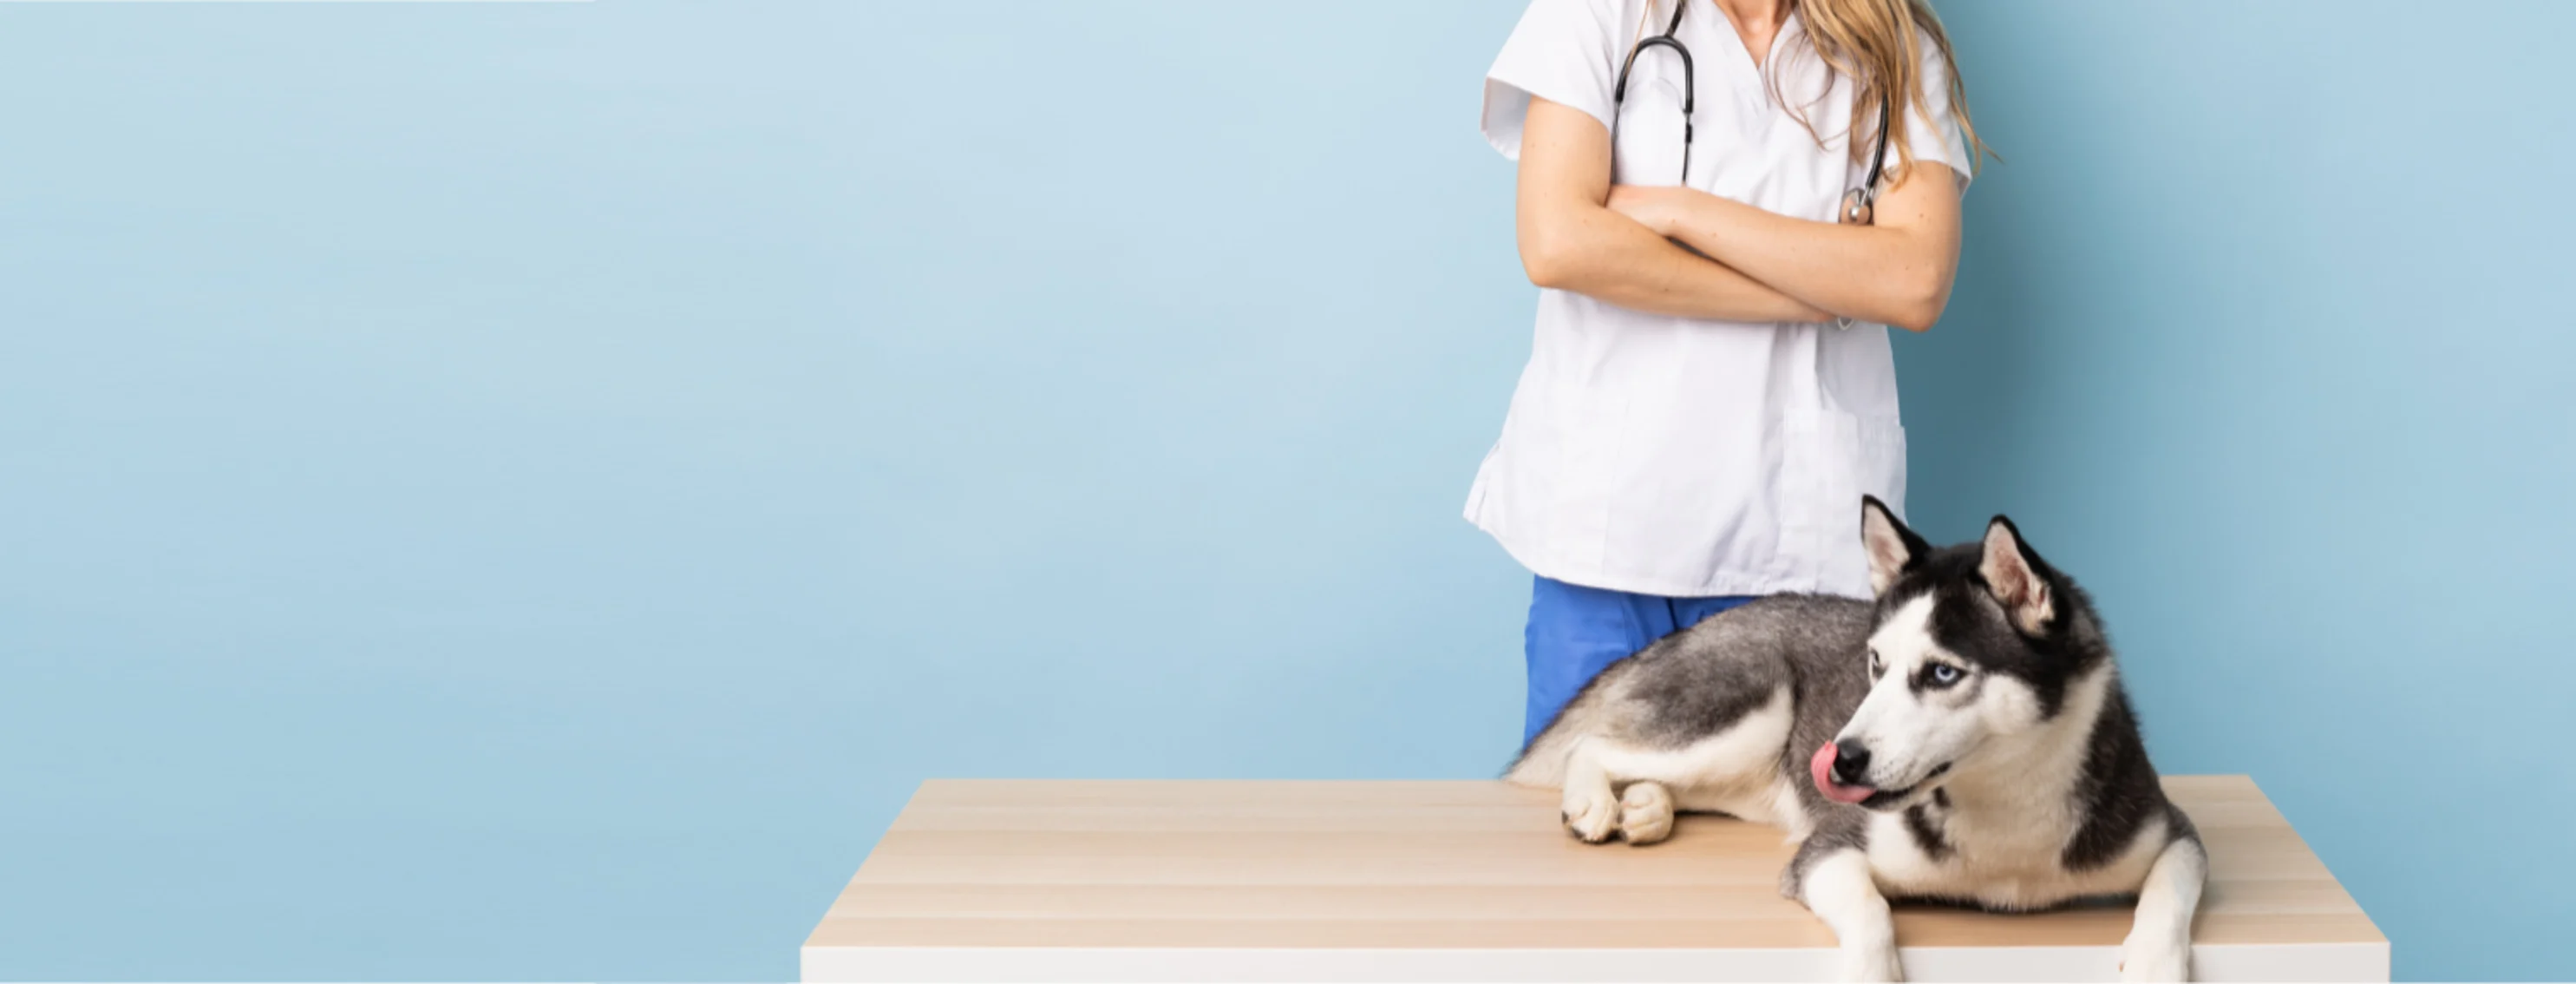 Veterinarian with Husky (Dog) Lying on a Wooden Exam Table